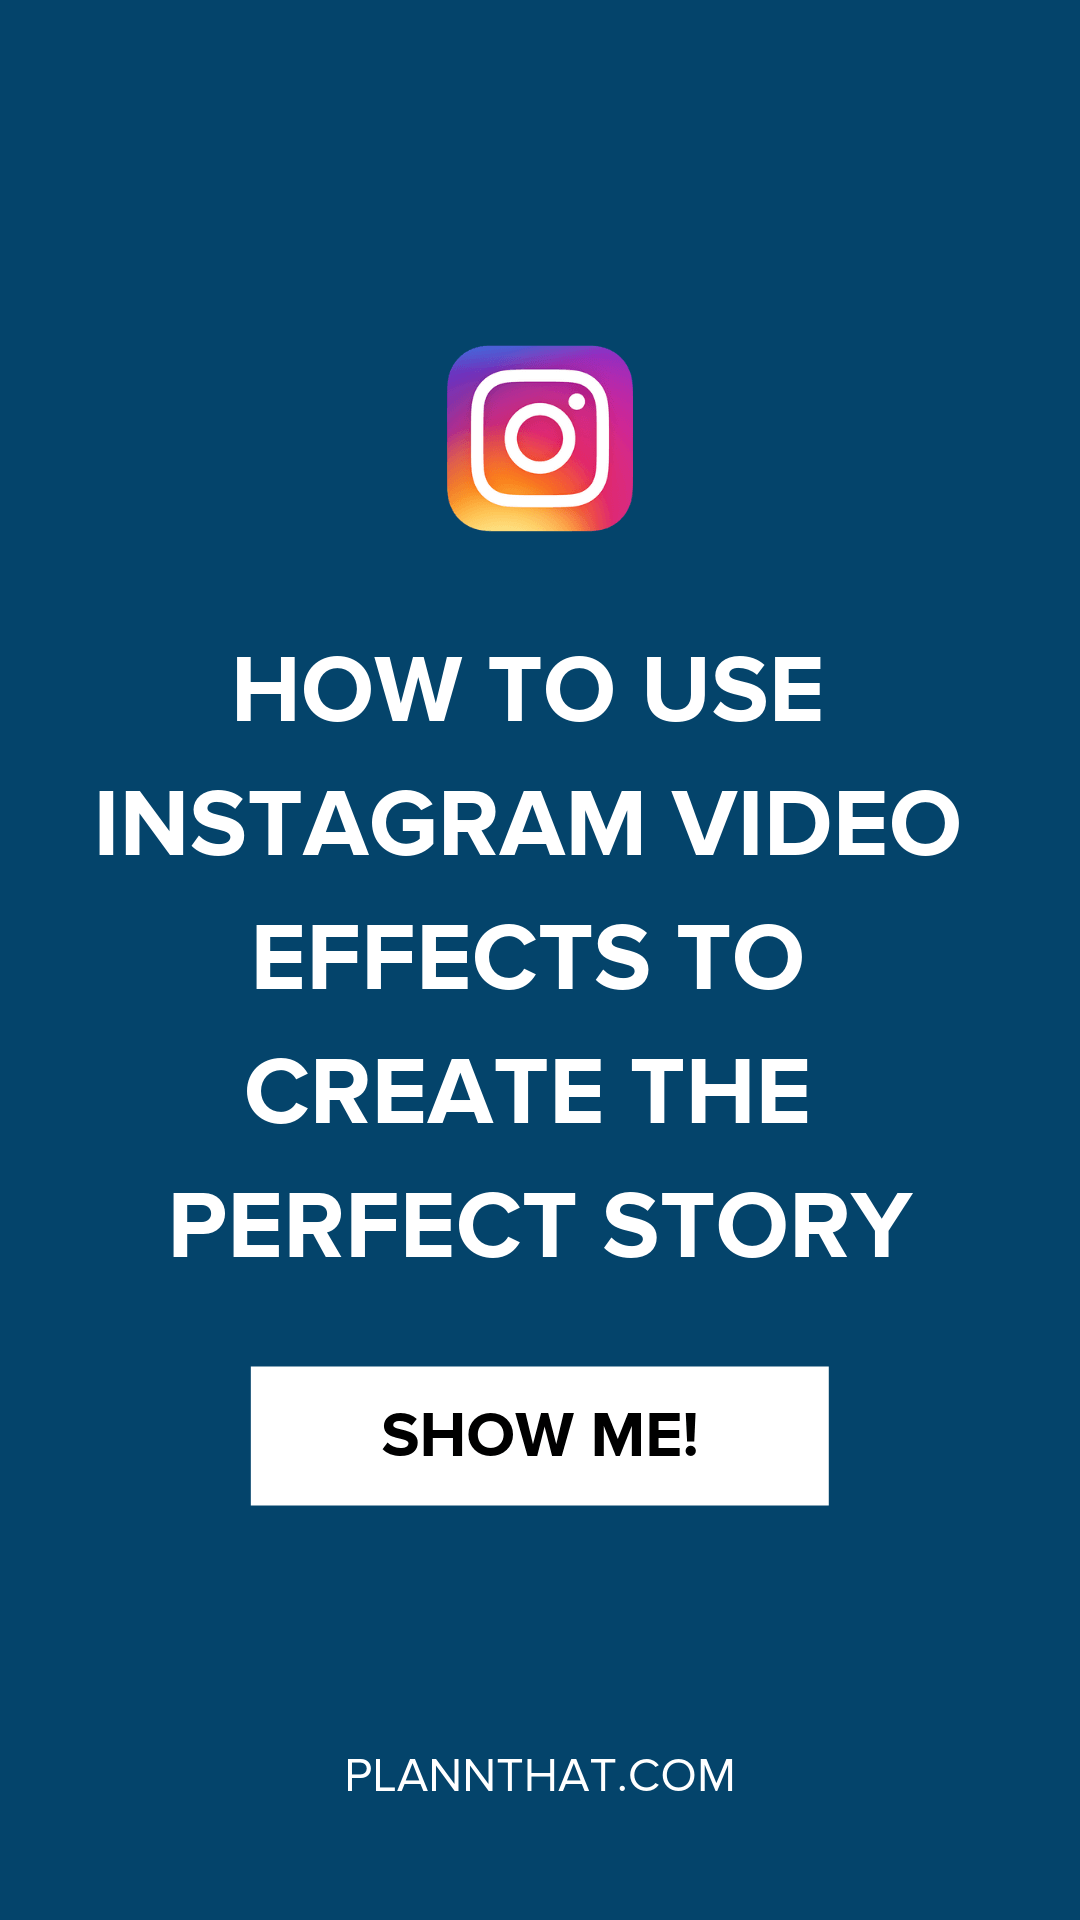 How to Use Instagram Video Effect to Create the Perfect Story | Plannthat